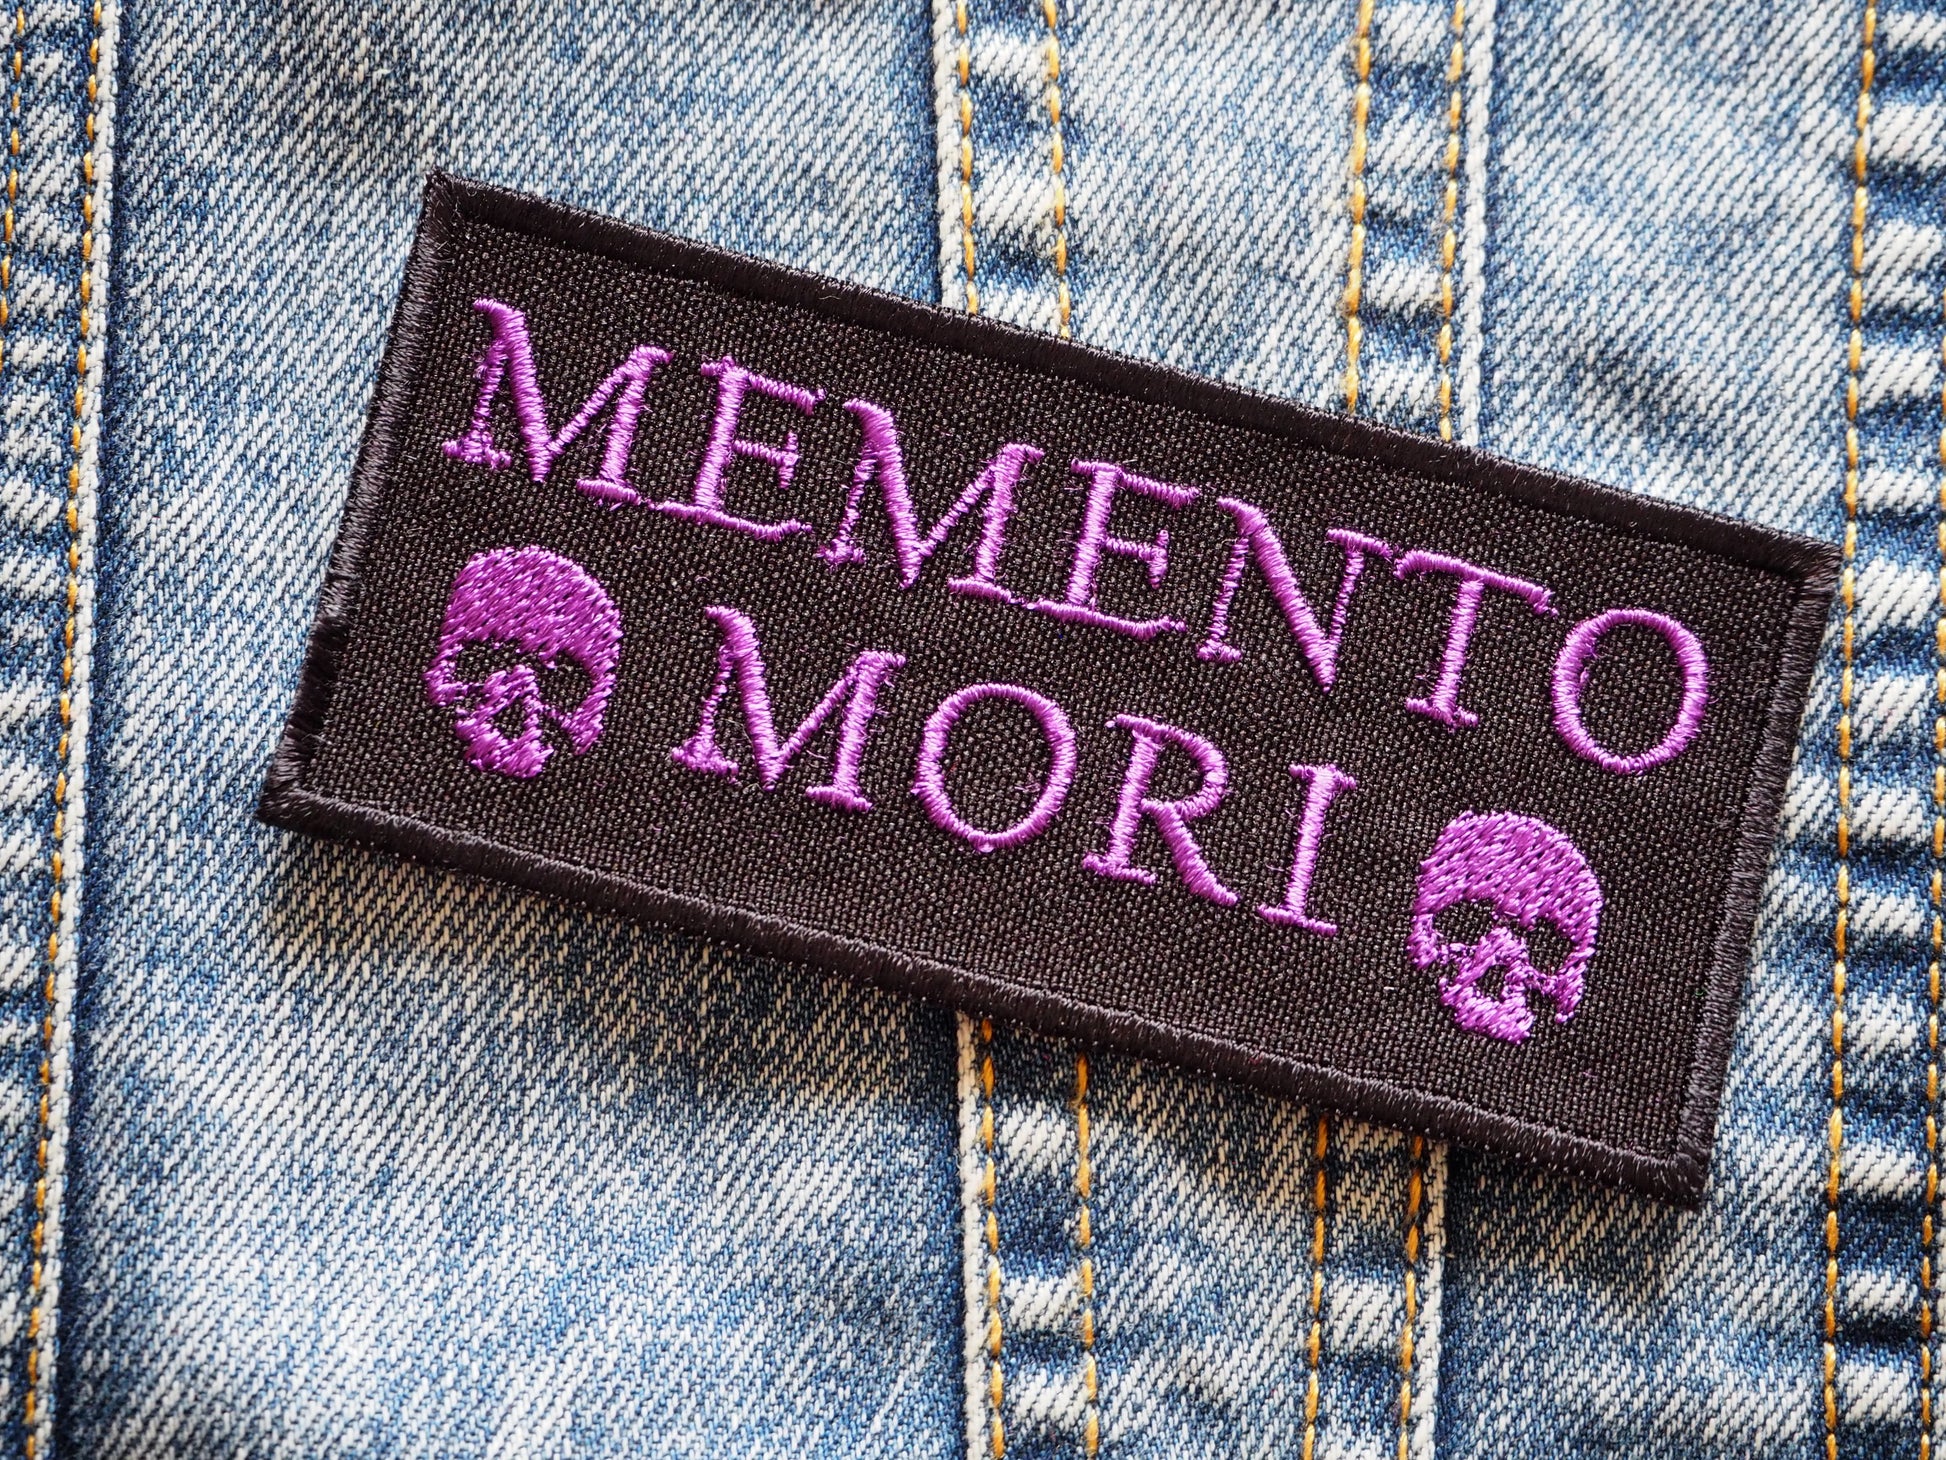 Memento Mori Embroidered Iron on Patch Skull Patch Mushrooms Sew